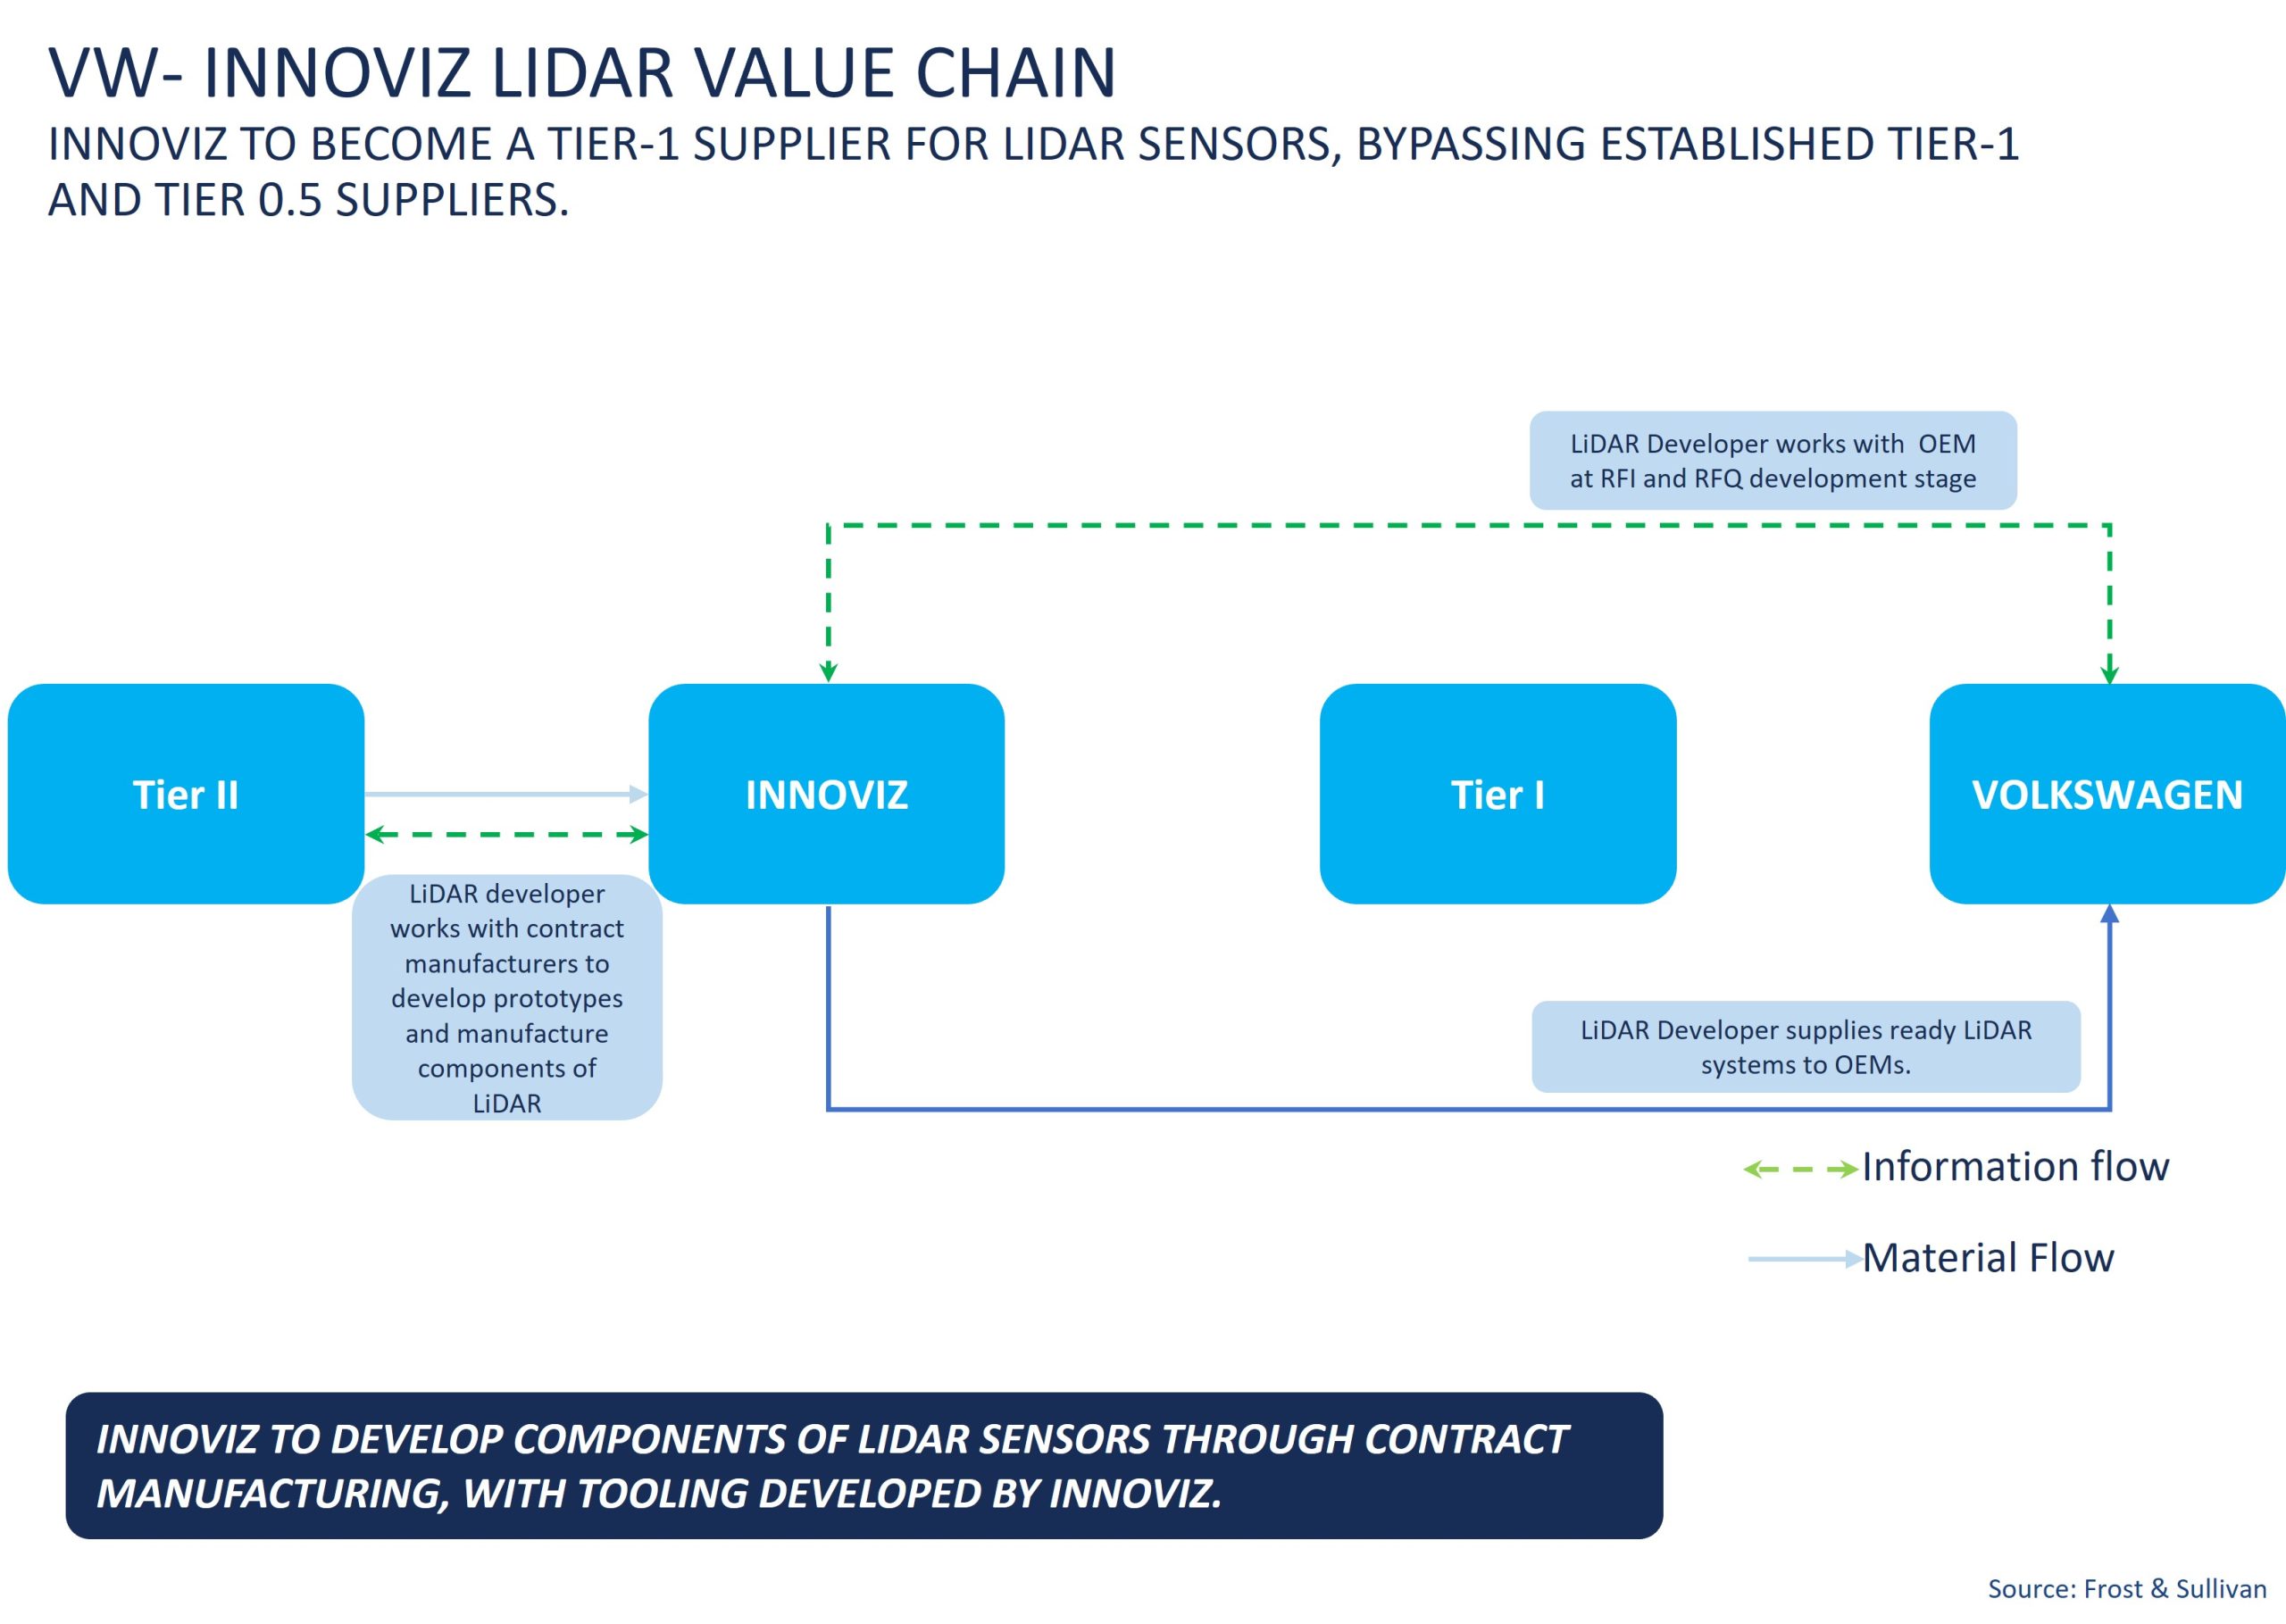 VW- INNOVIZ LIDAR VALUE CHAIN INNOVIZ TO BECOME A TIER-1 SUPPLIER FOR LIDAR SENSORS, BYPASSING ESTABLISHED TIER-1 AND TIER 0.5 SUPPLIERS.